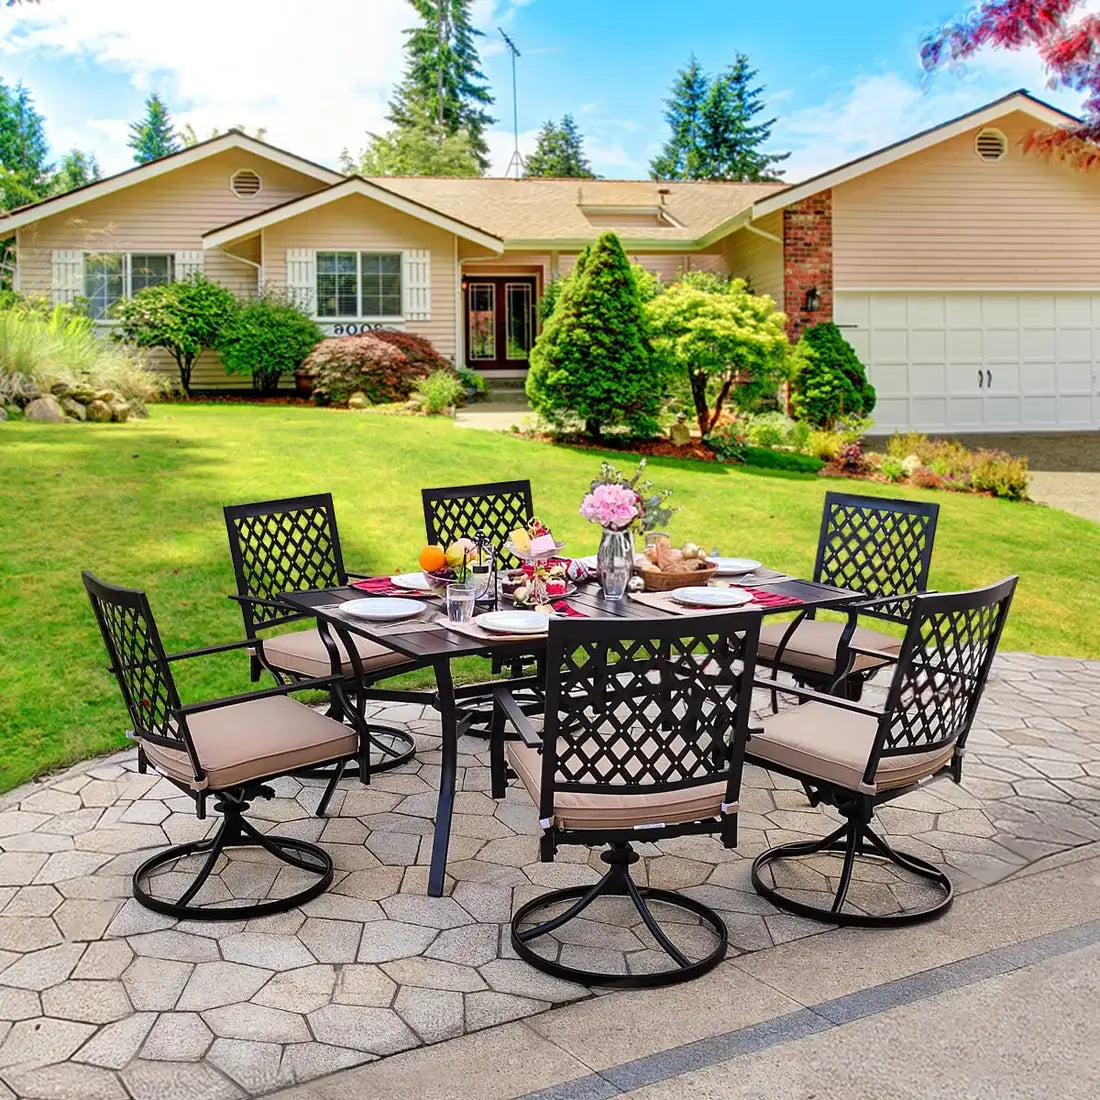 7-Piece Patio Dining Sets with Cushions, 6 Swivel Chairs & 63" Rect Table (1.57" Umbrella Hole)